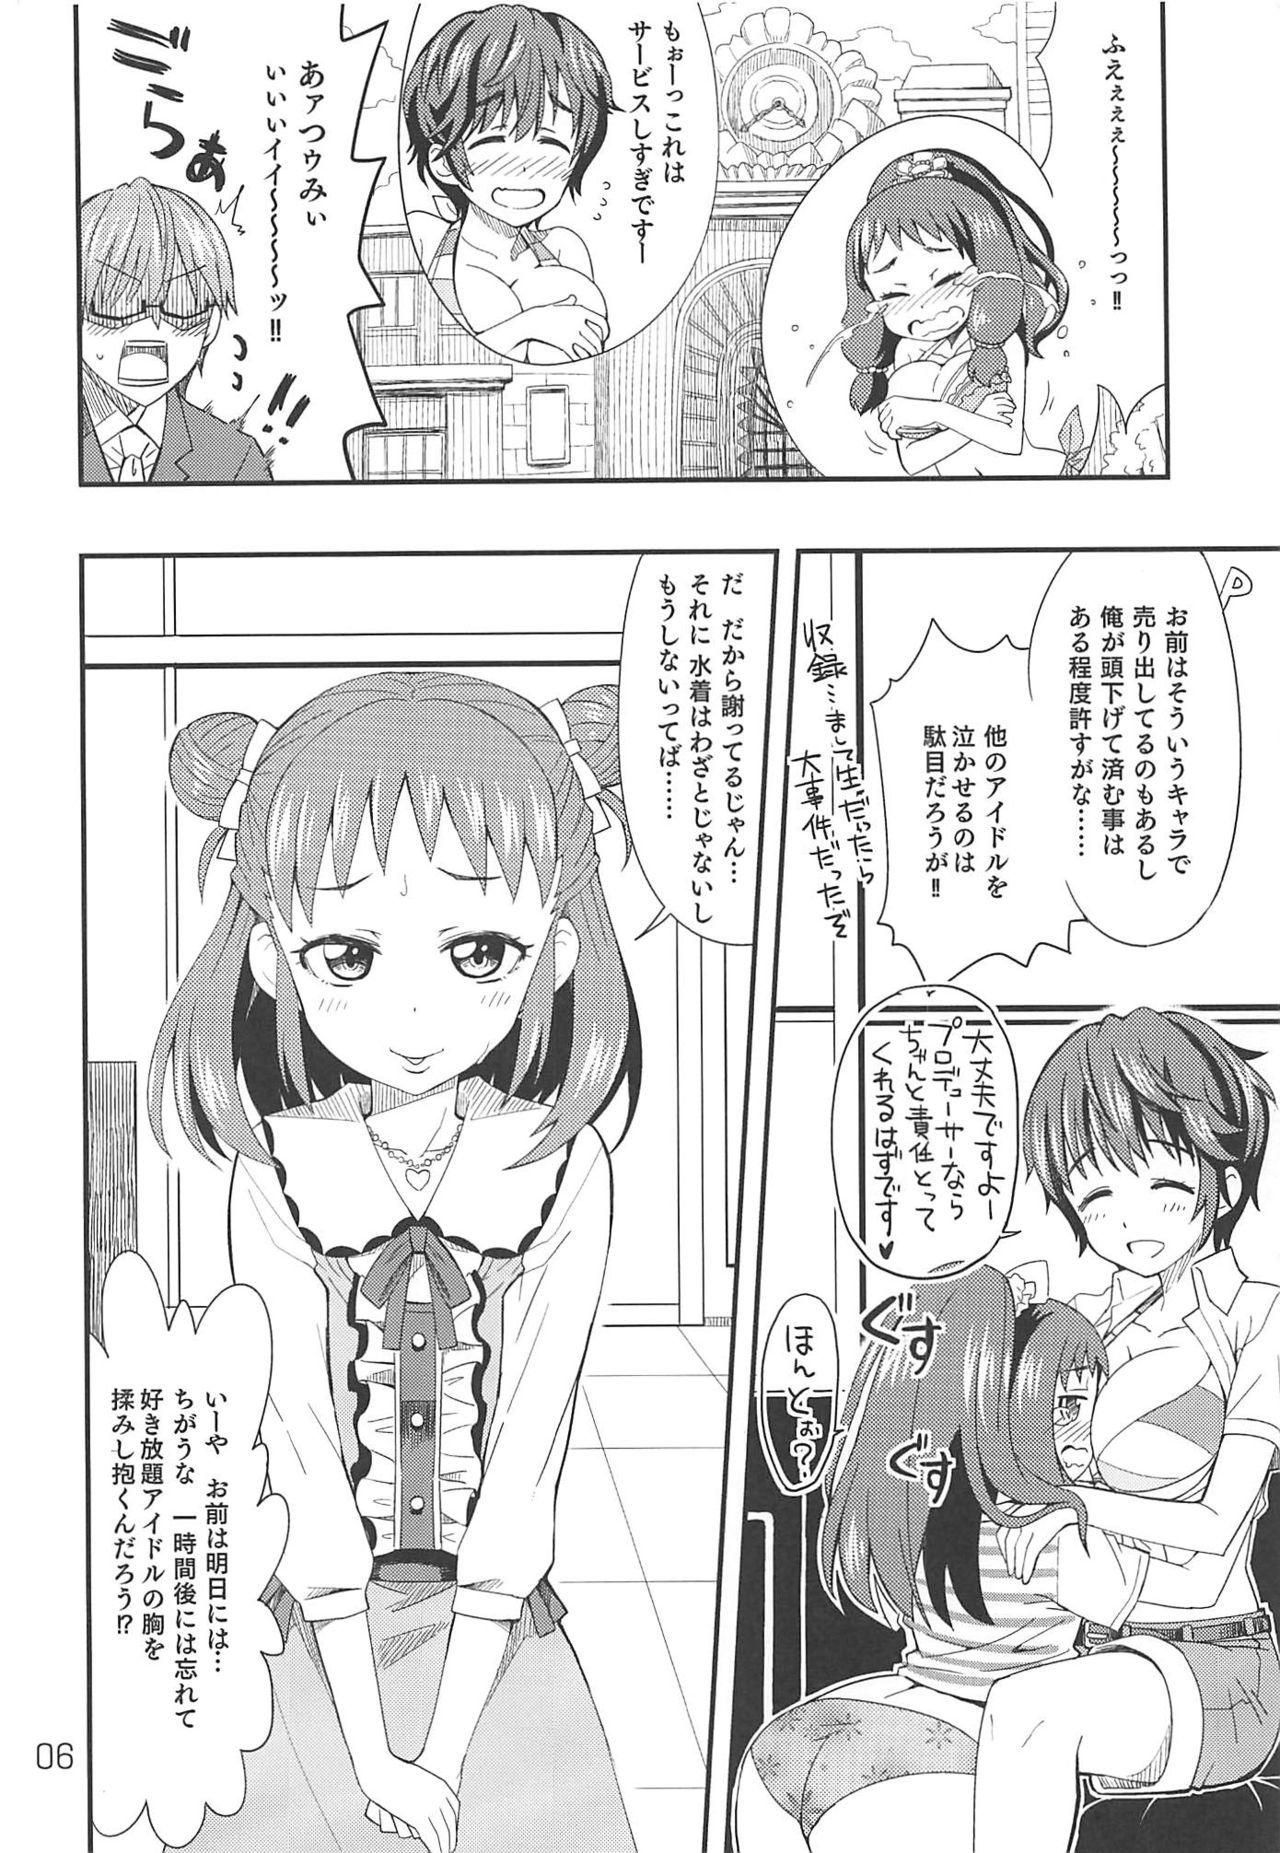 Ink Wotometicm@ster - The idolmaster Tinder - Page 5